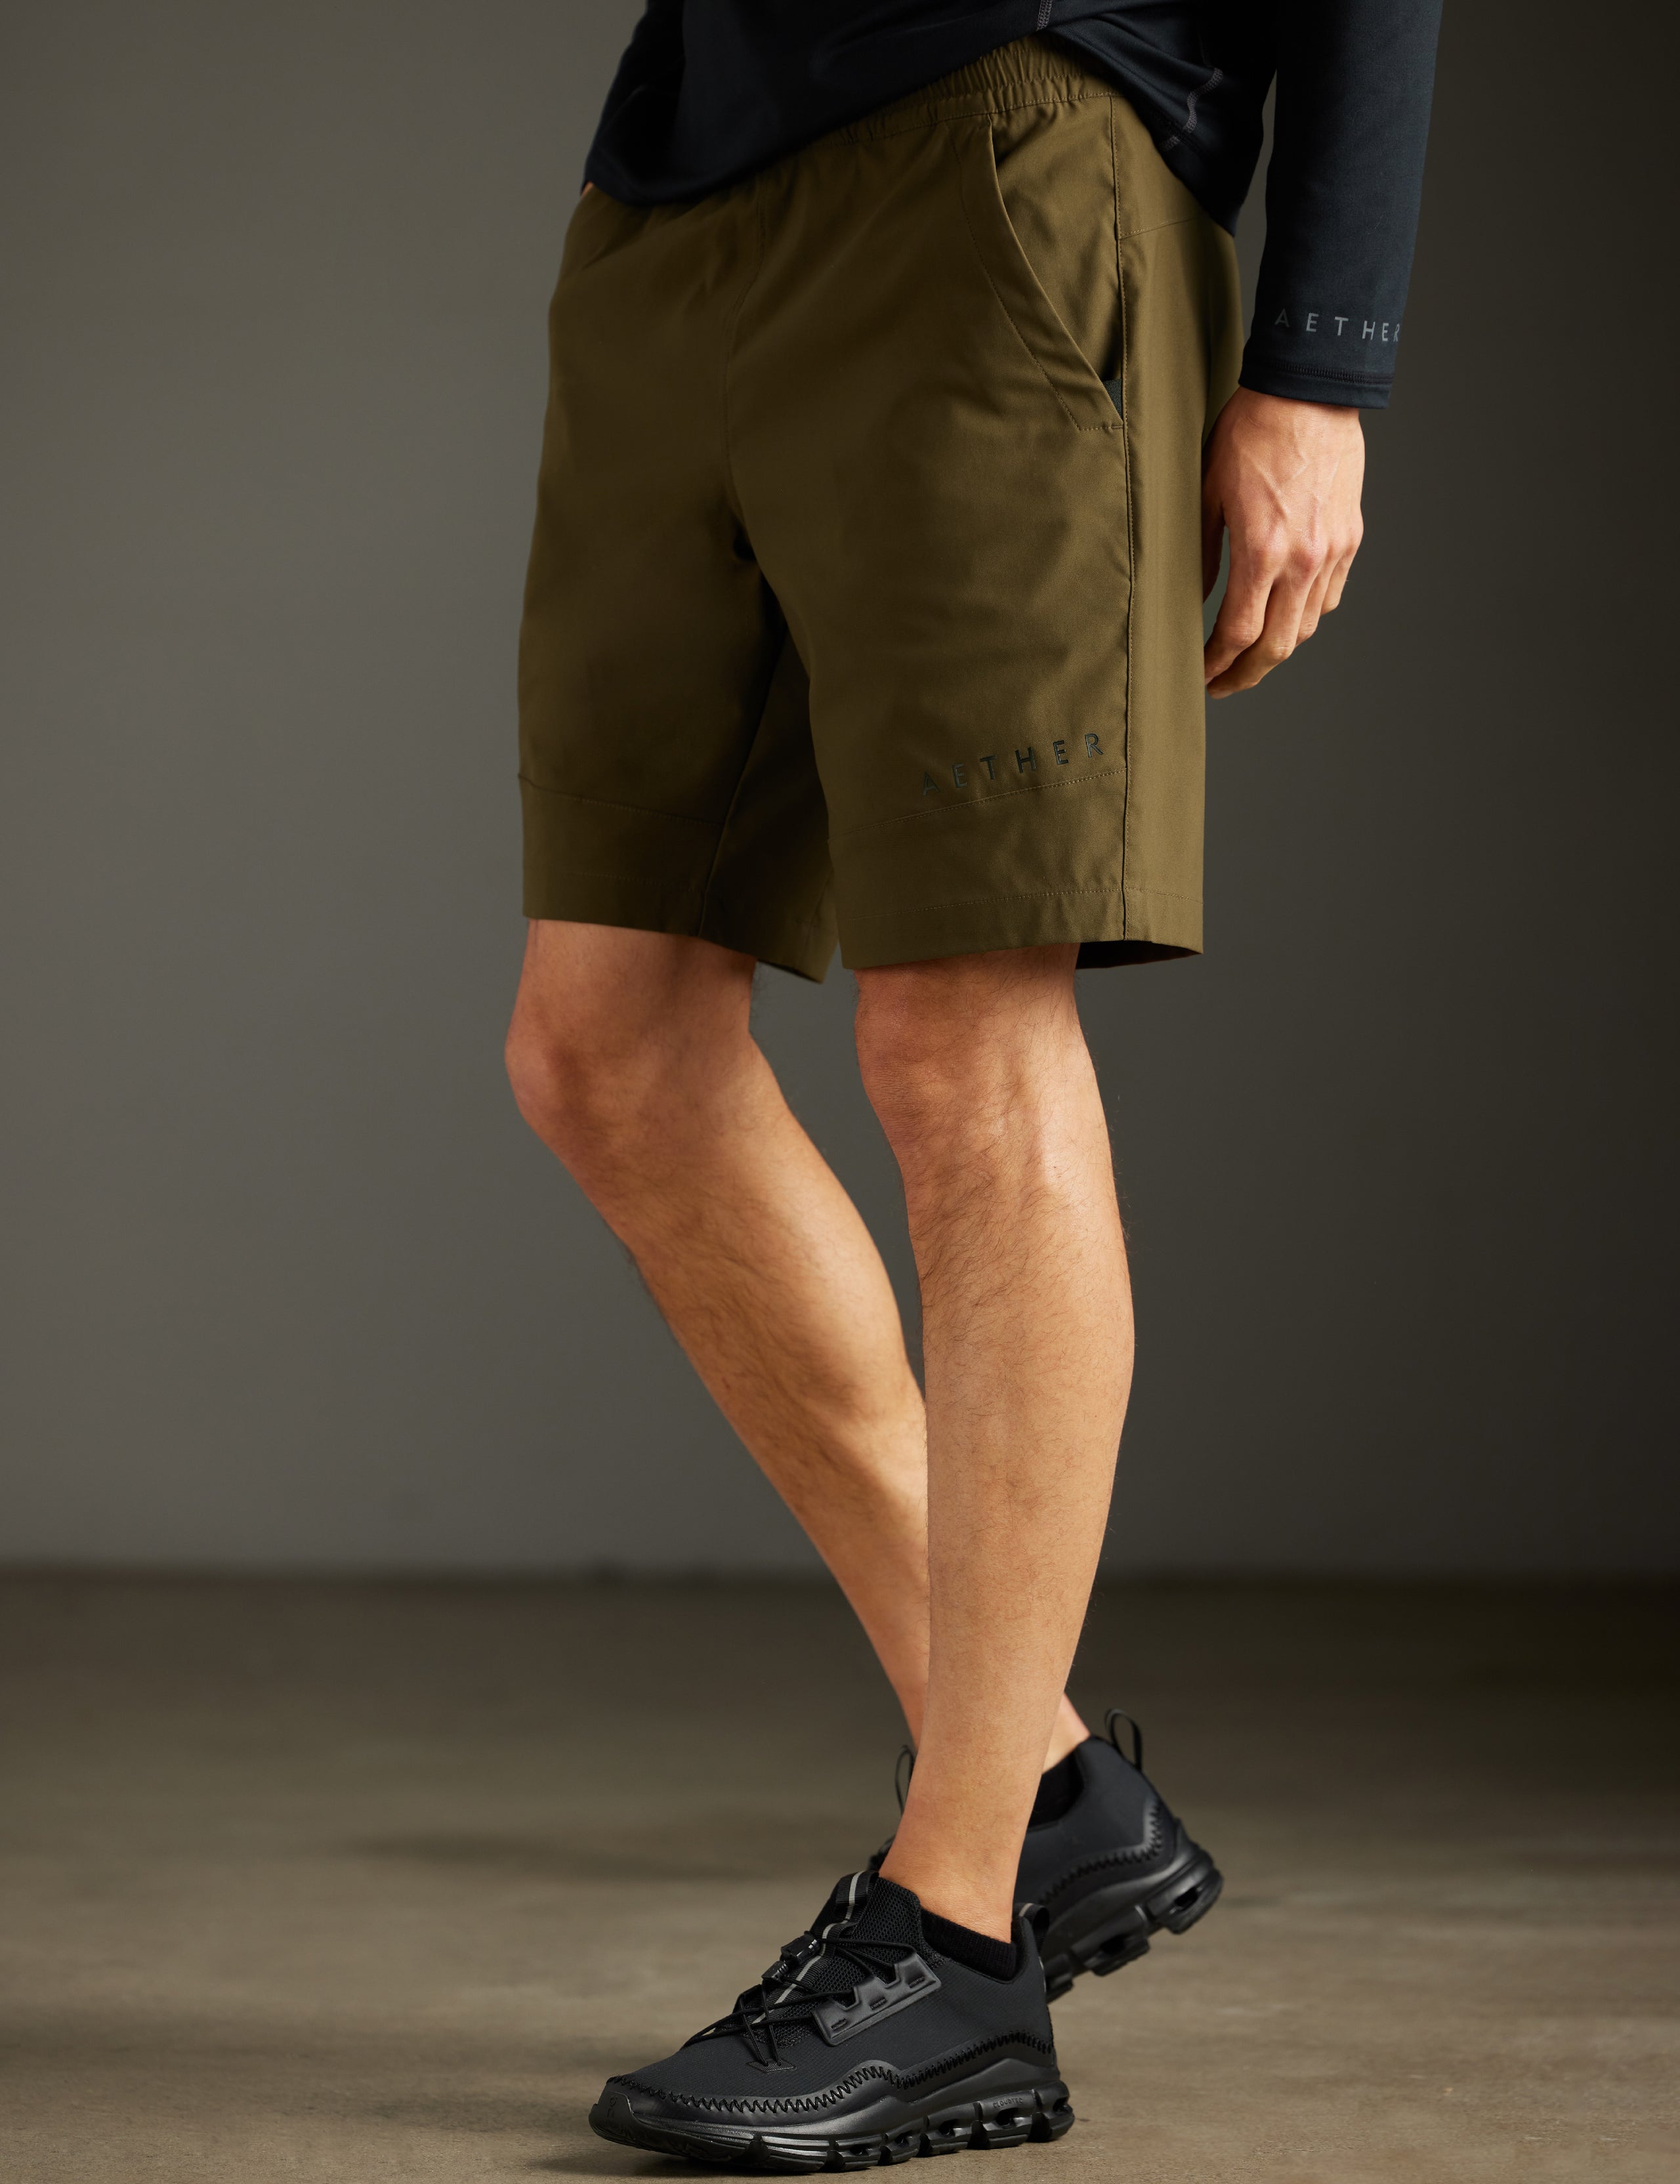 men's green shorts from AETHER Apparel